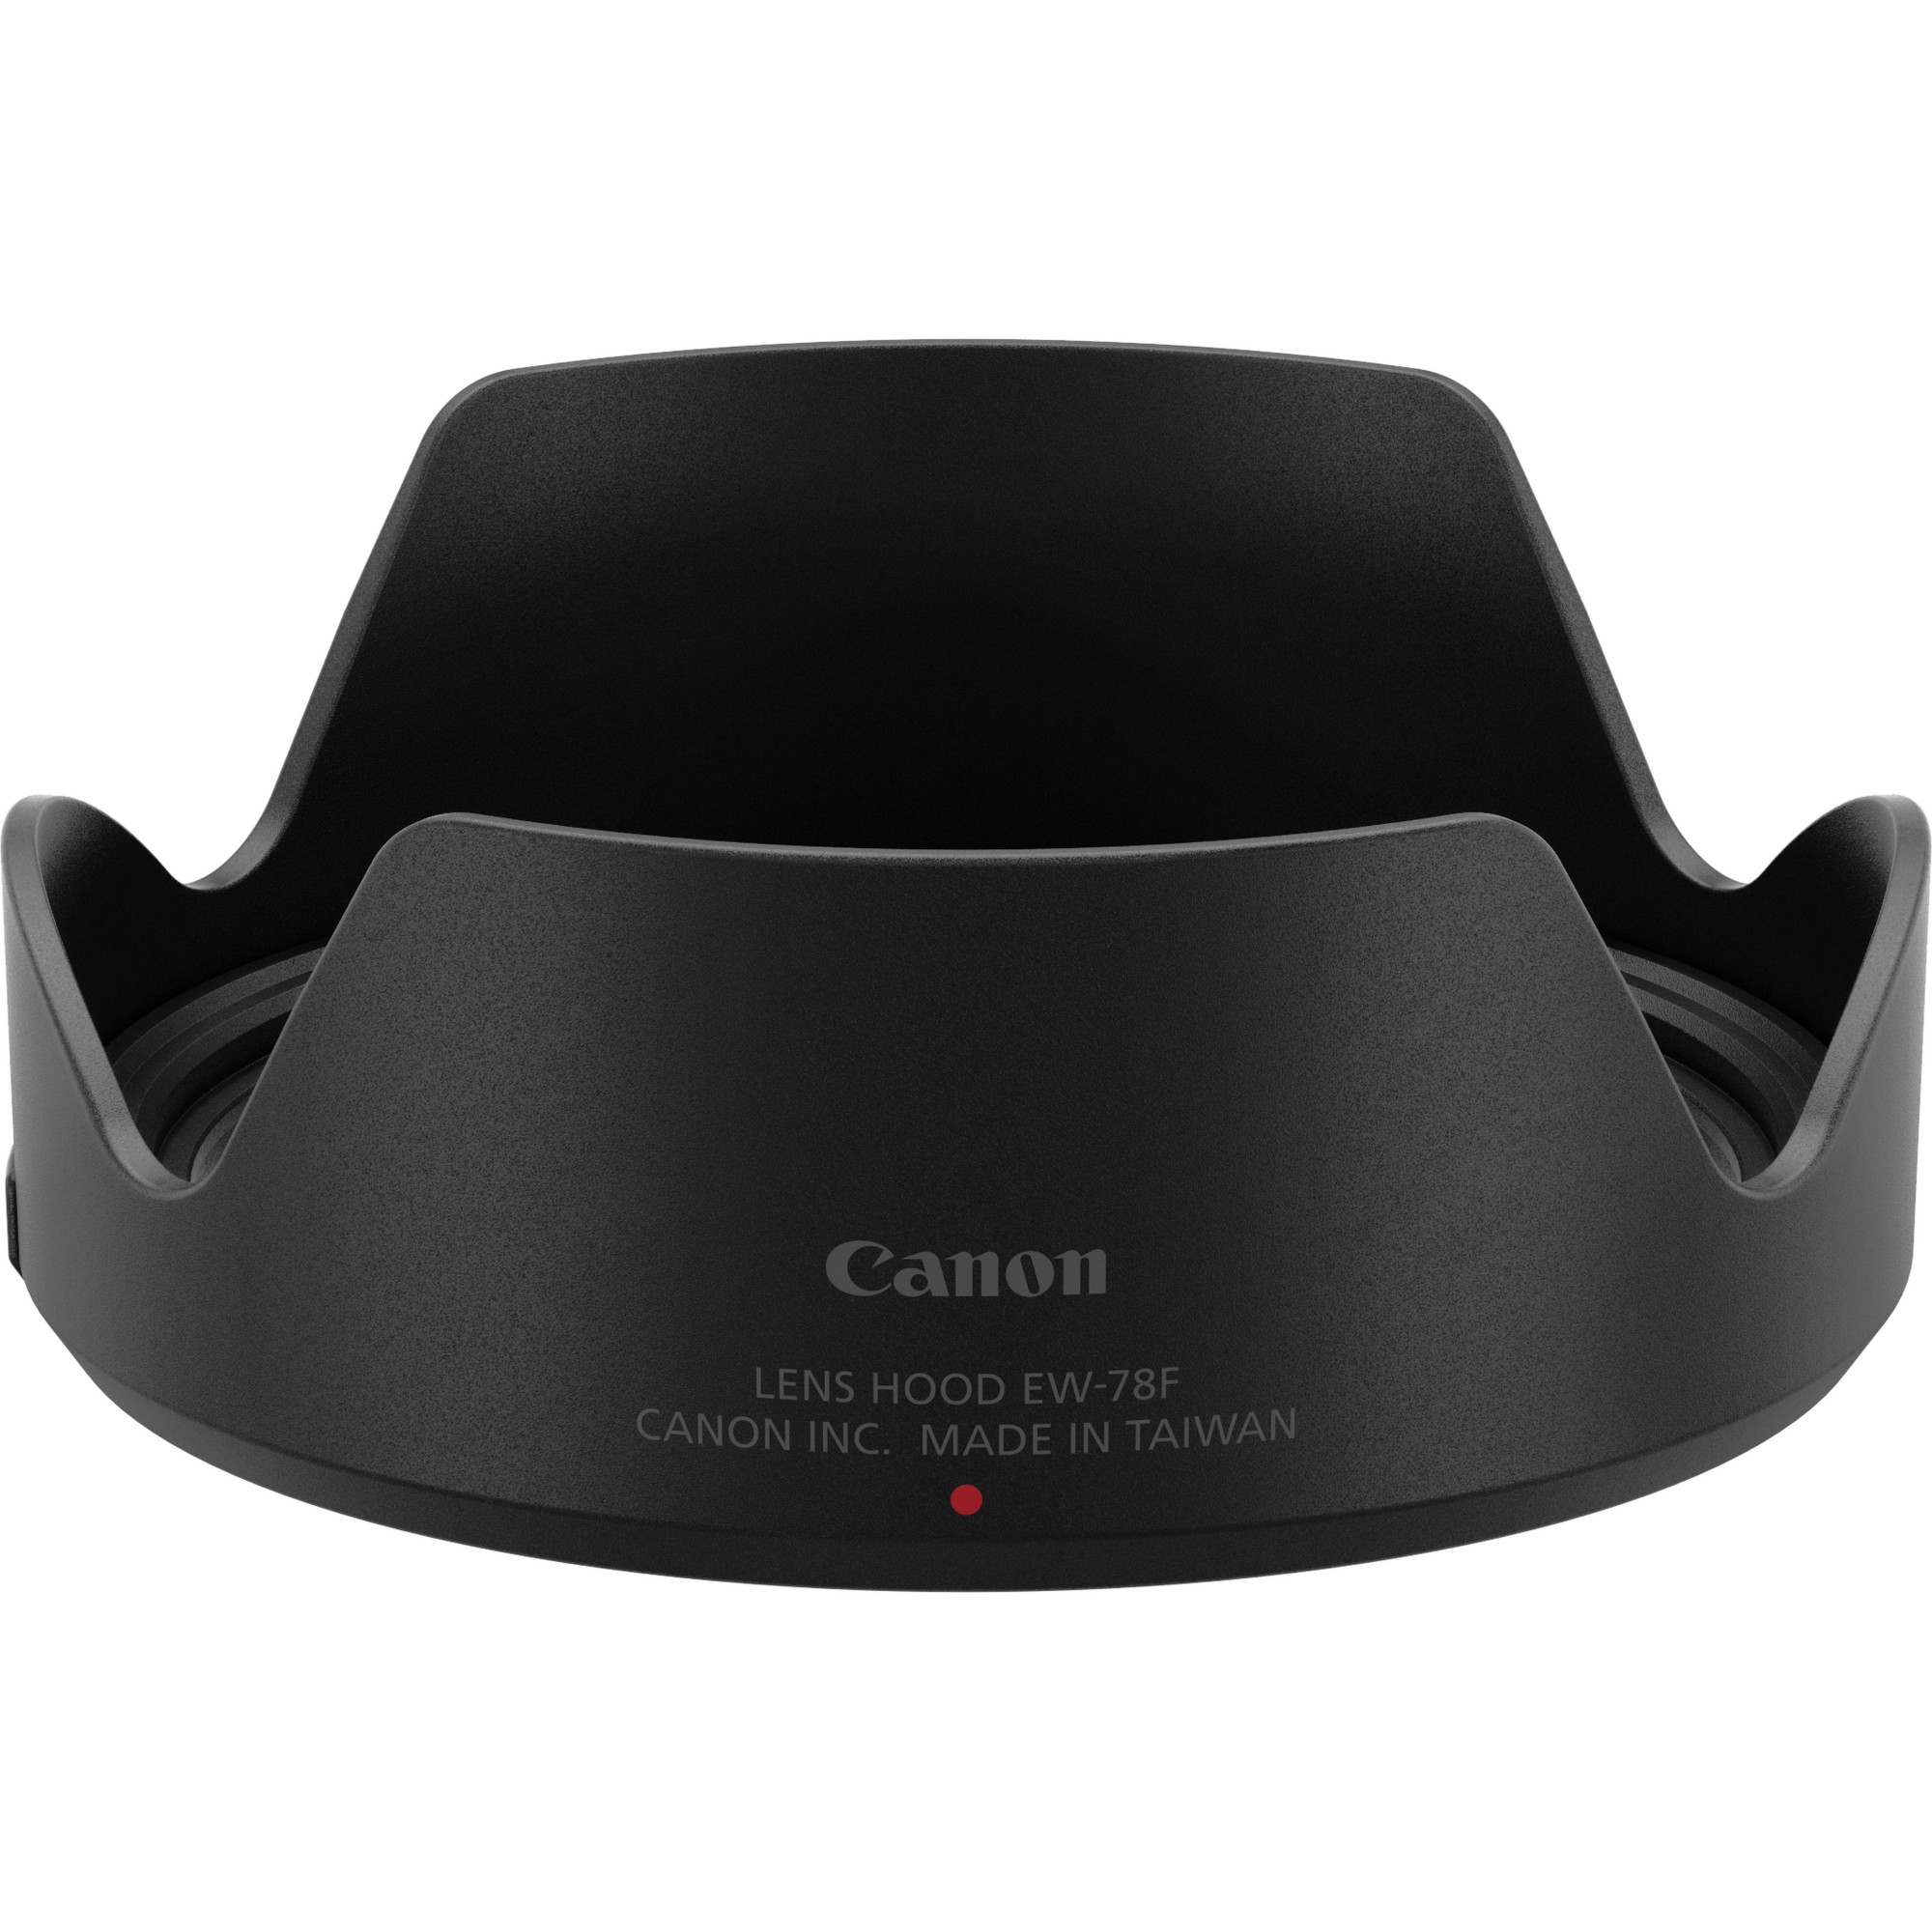 Photos - Other photo accessories Canon EW-78F Lens Hood 3685C001 